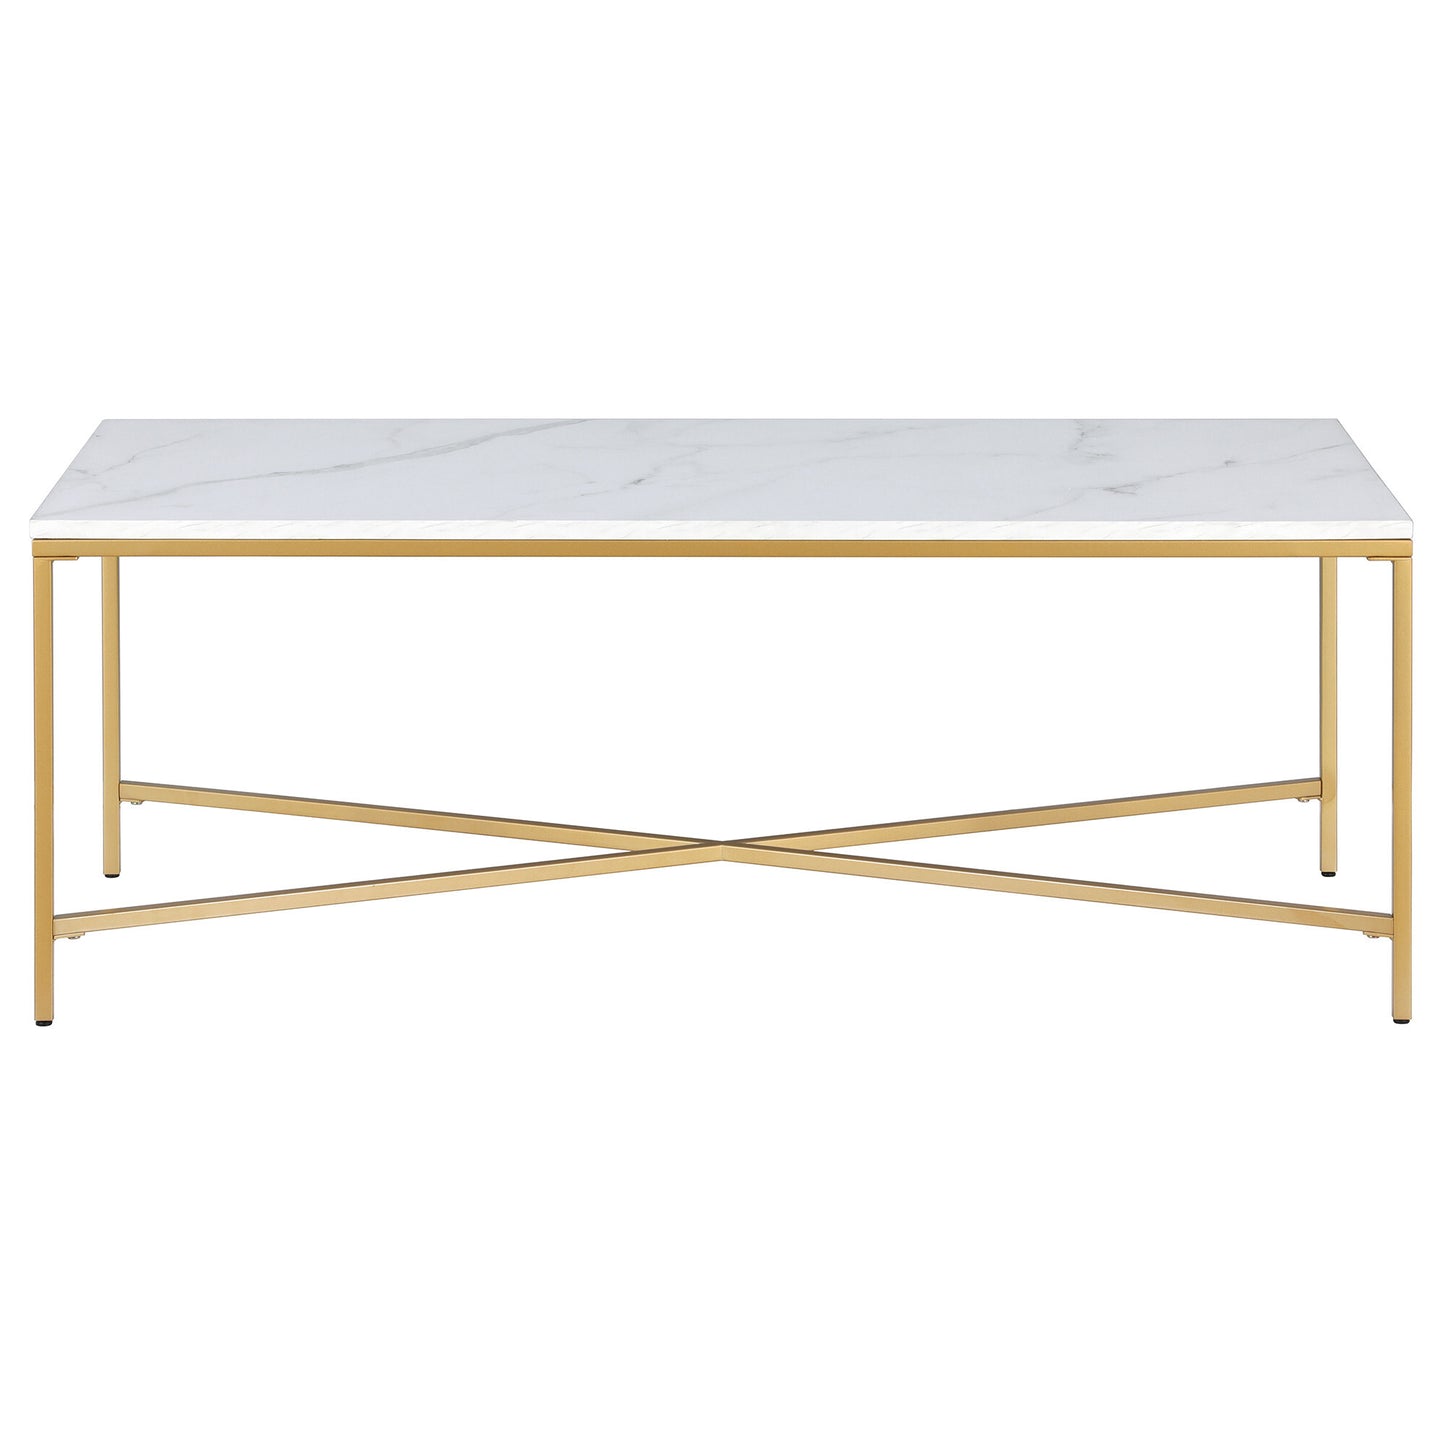 48" Gold And White Manufactured Wood Rectangular Coffee Table